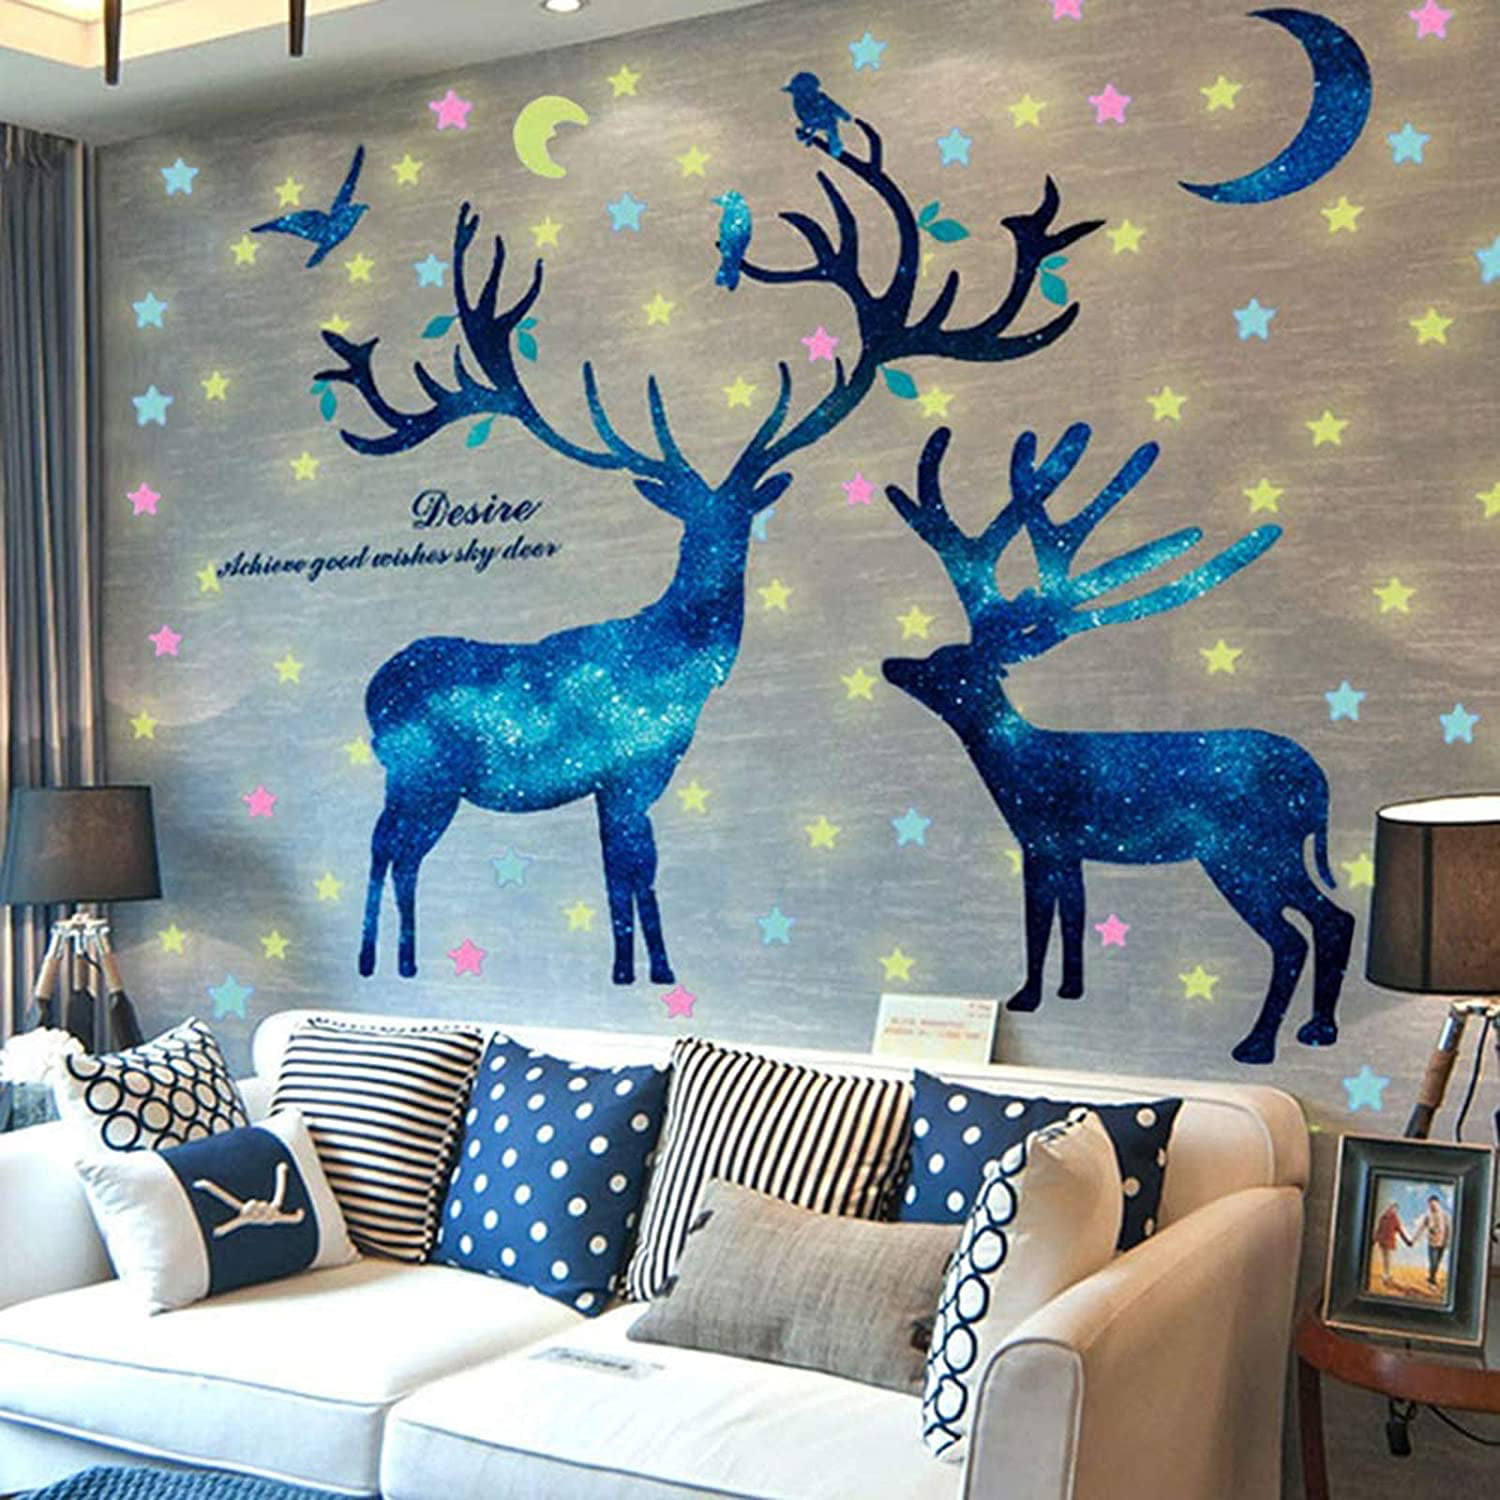 Removable Teen Wolf Moon DIY wall decal stickers for living room bedroom decoration Girls Kids Home Mural Creative Wall Decals A 